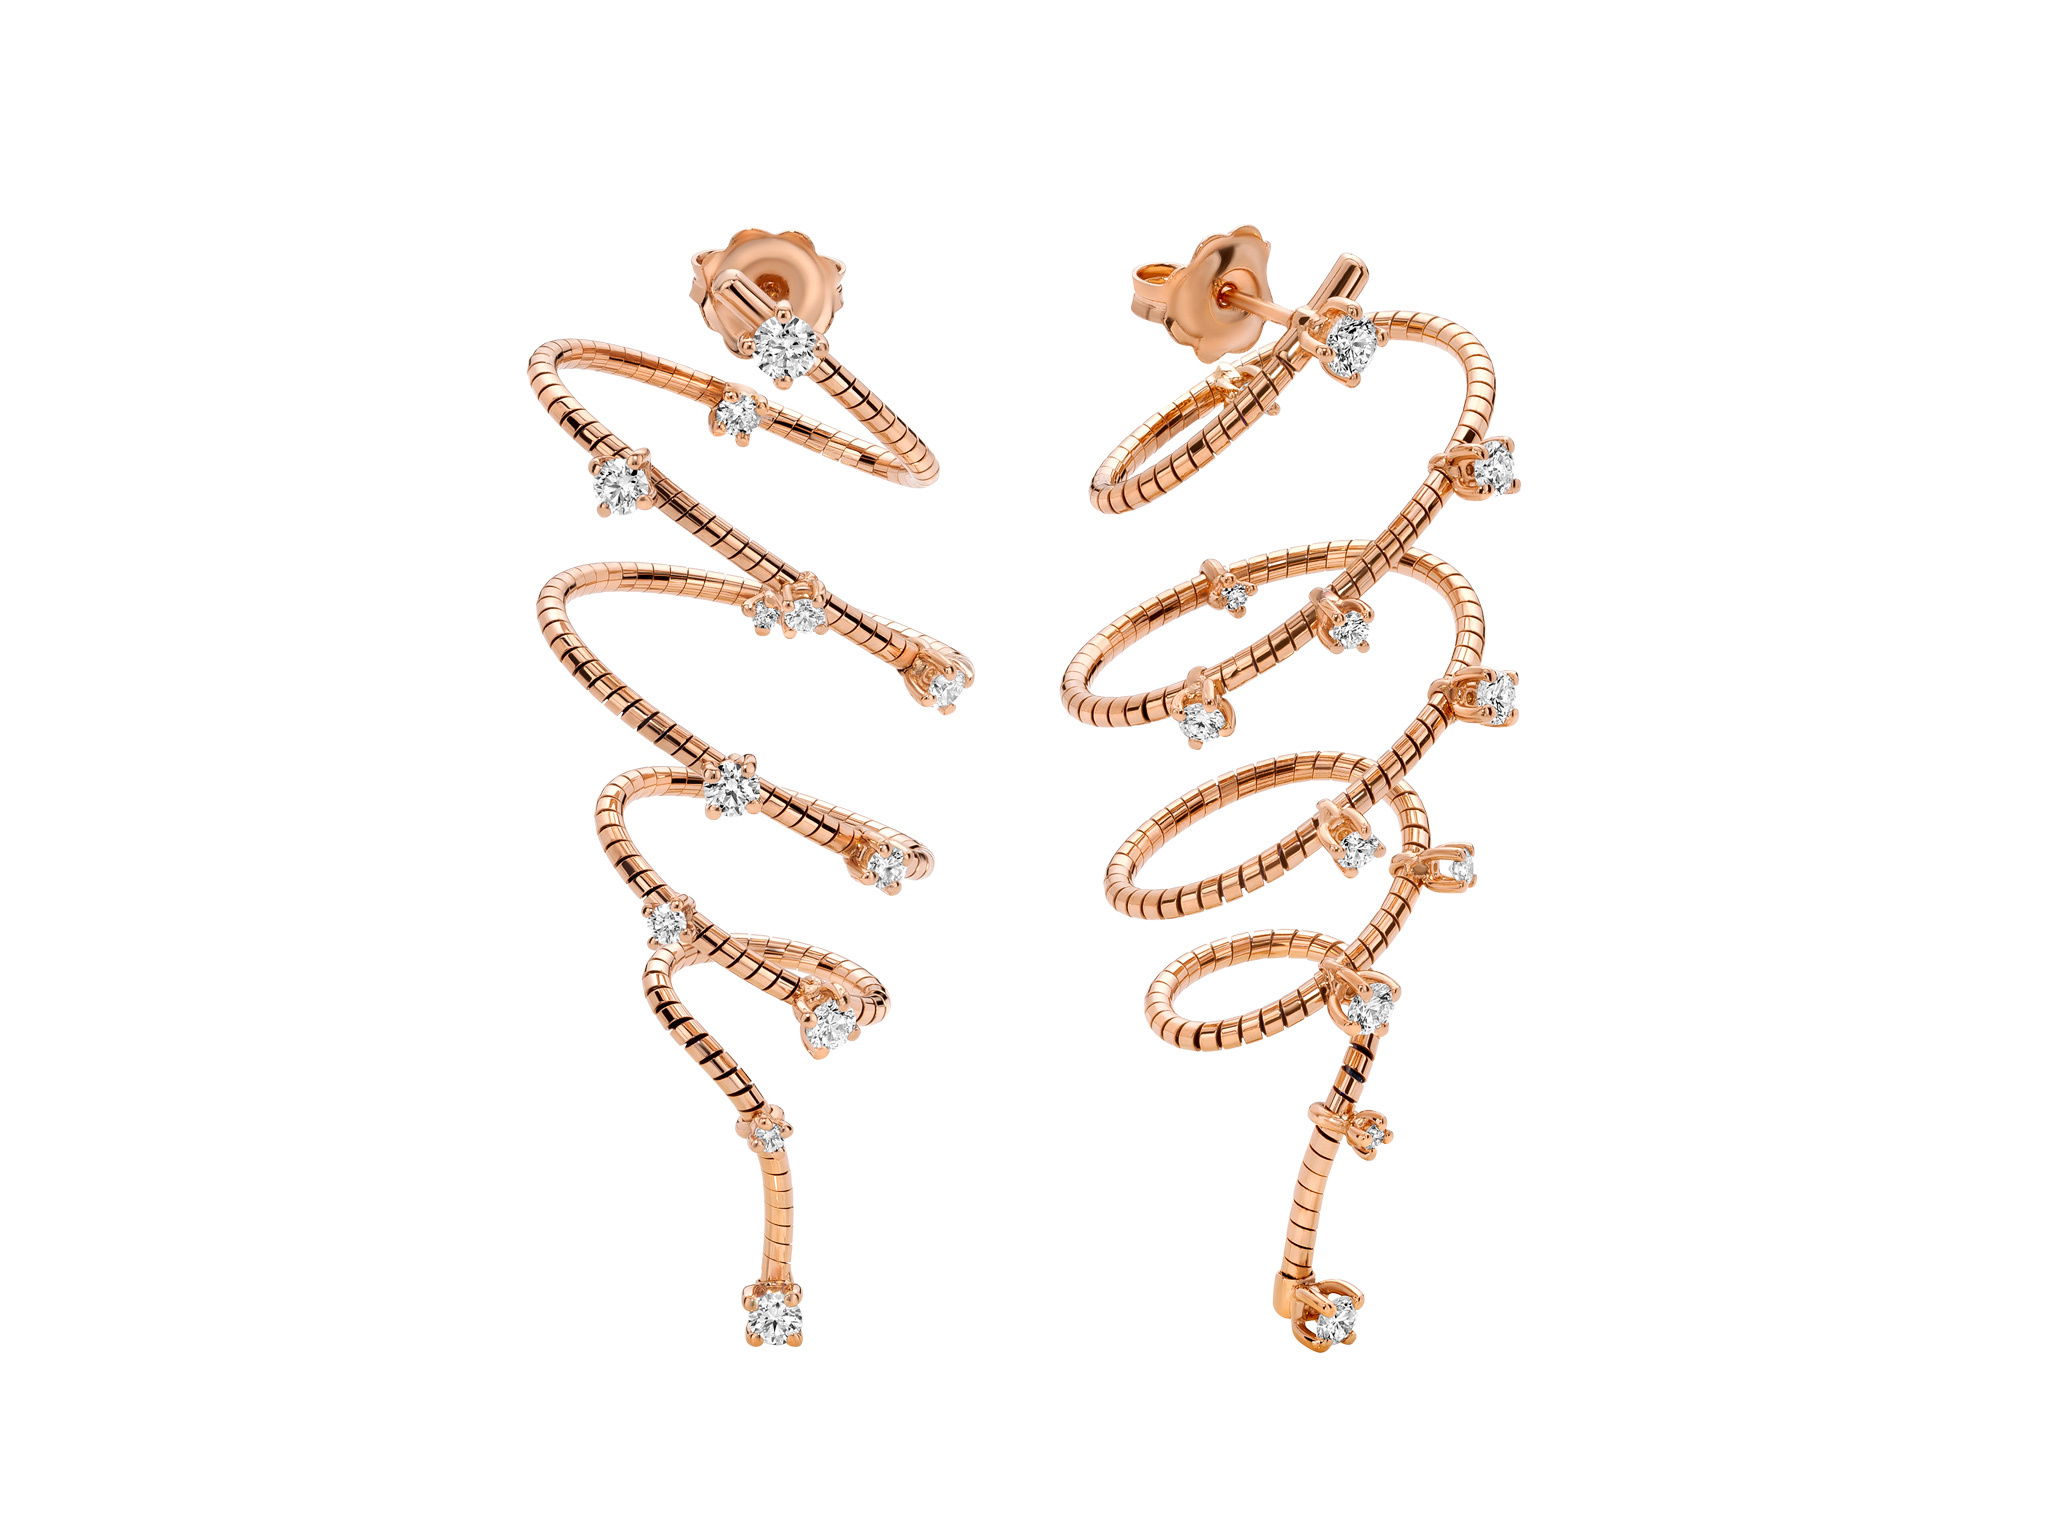 NOVELTIES 5cm Spiral Drop Earrings with White Diamonds in 18kt Pink Gold